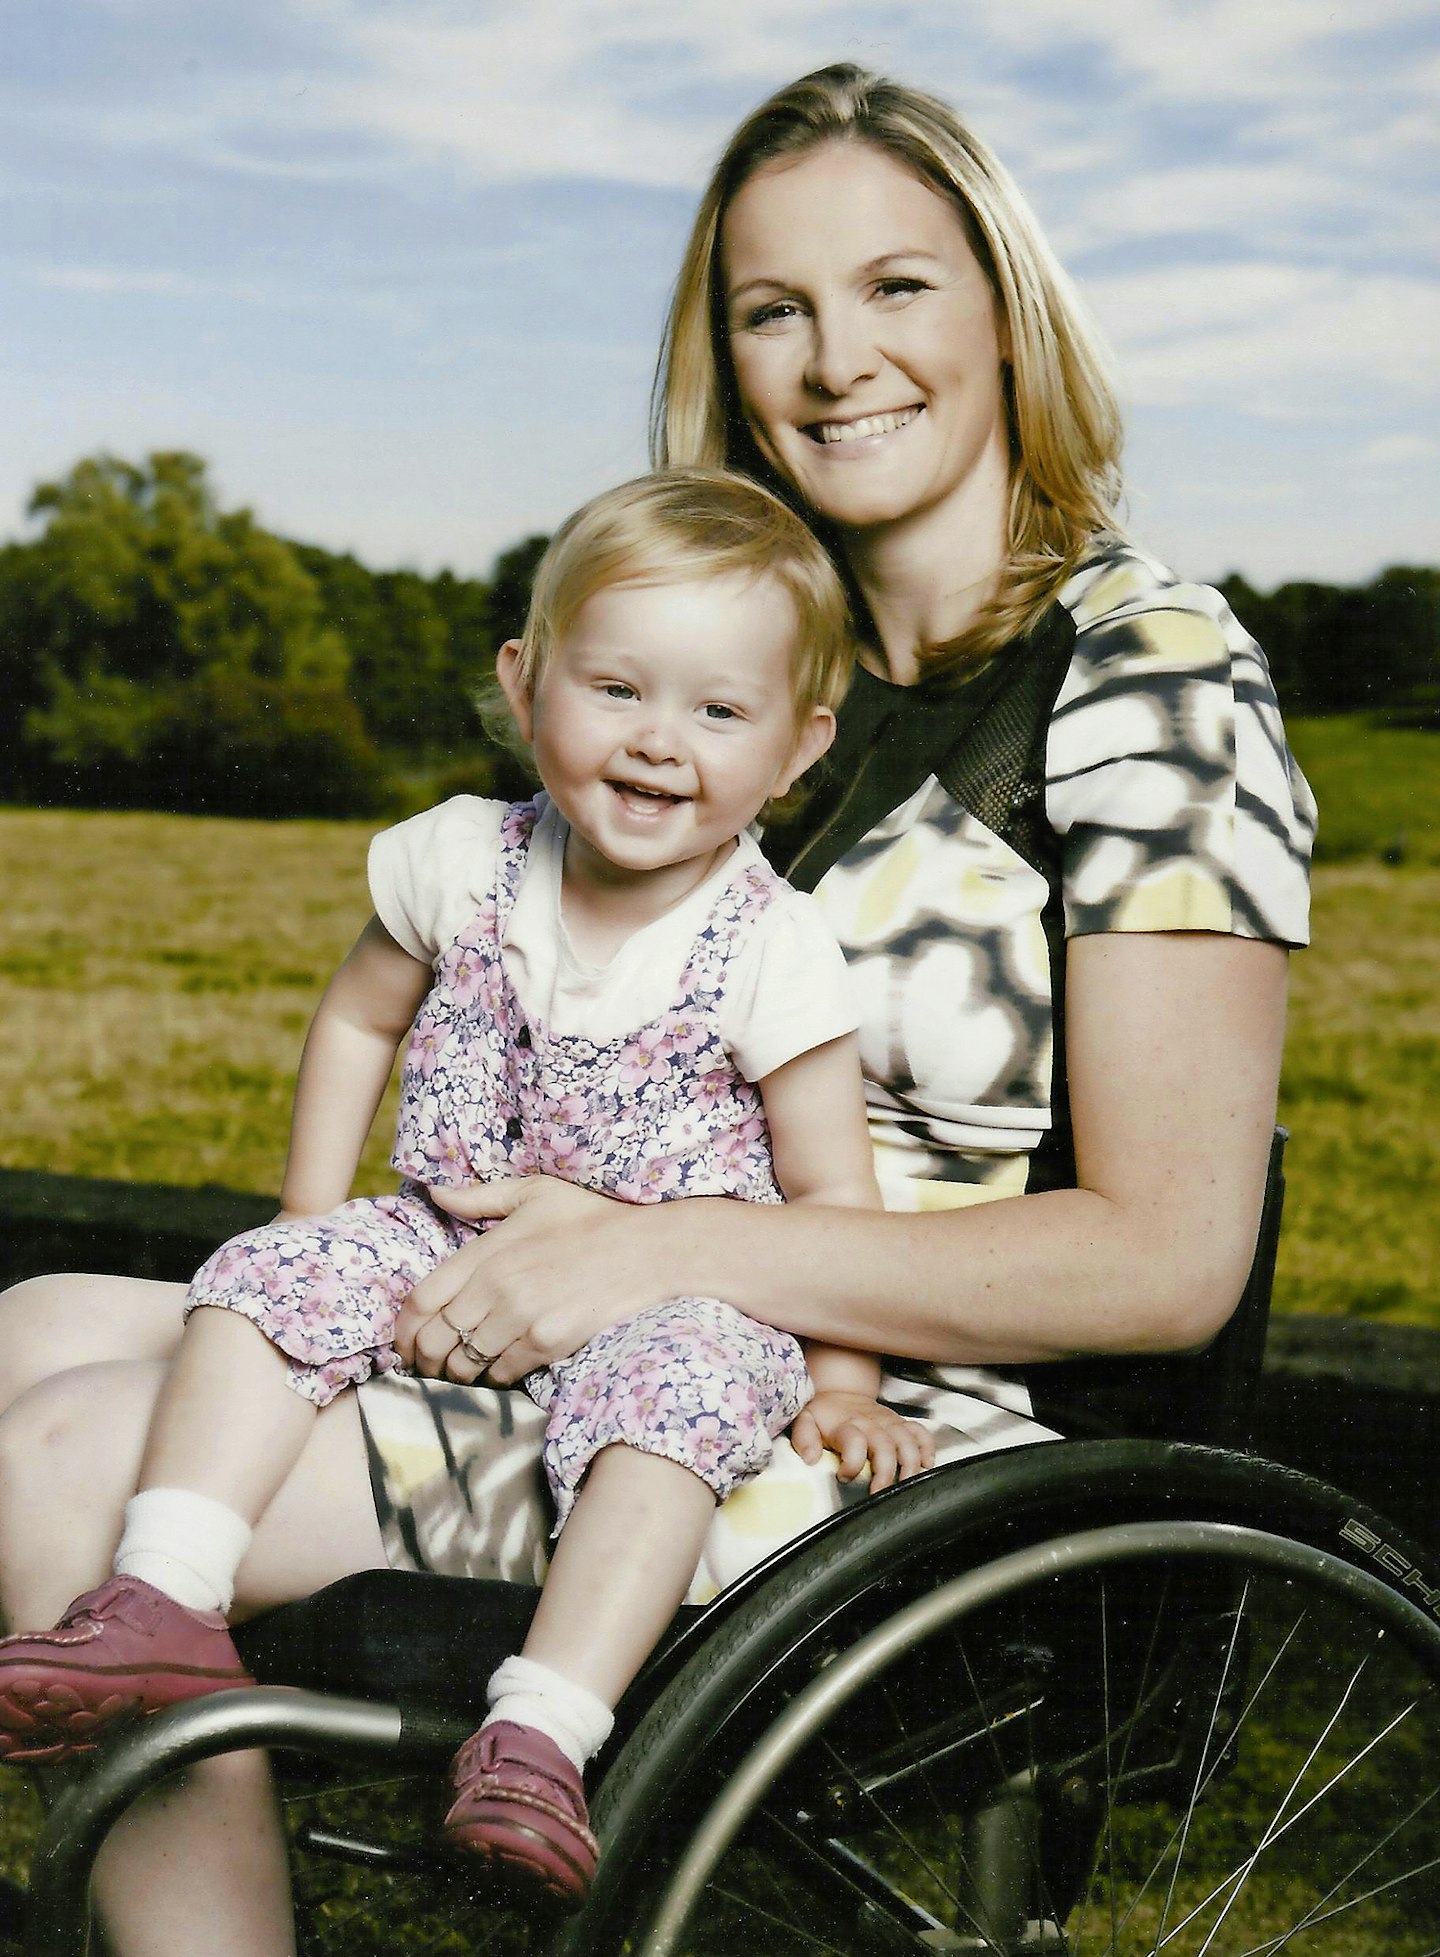 claire-lomas-paralysed-bionic-pregnant-woman